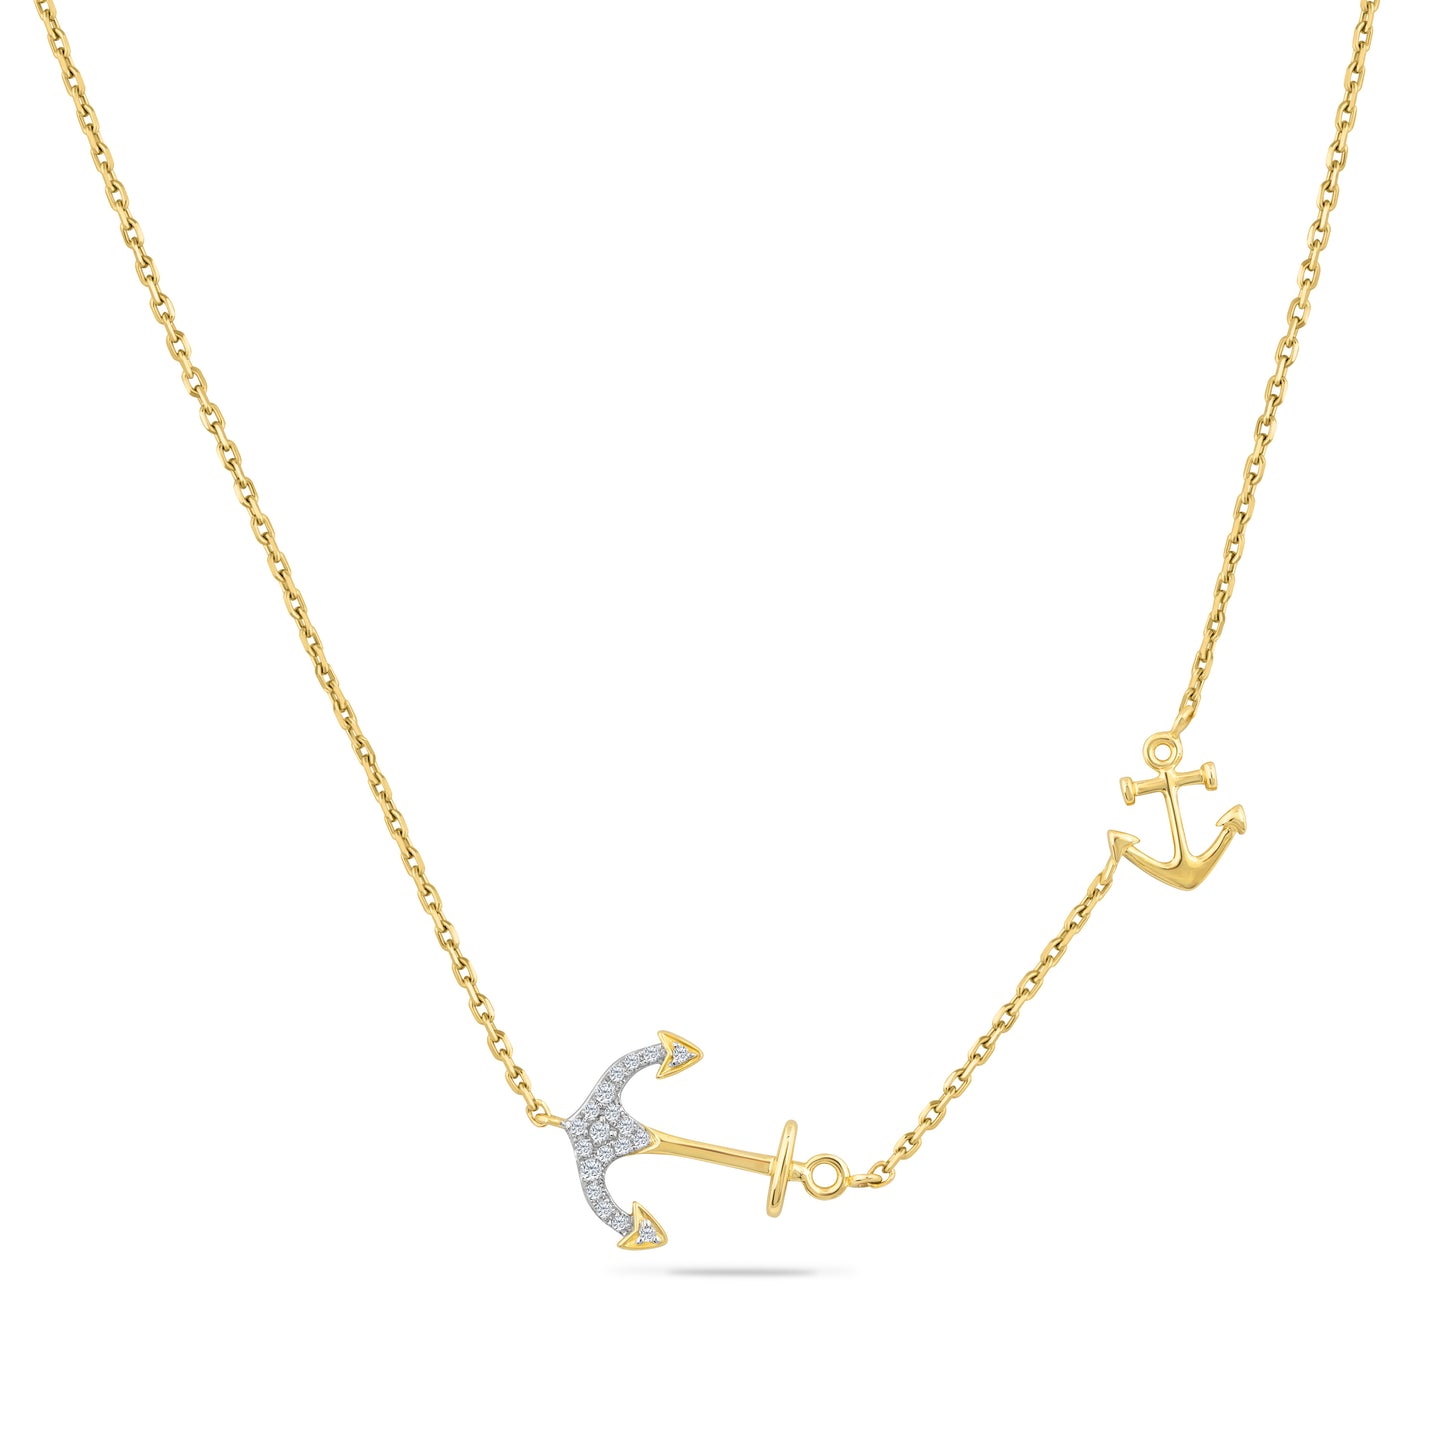 14K ANCHOR NECKLACE WITH SMALL ANCHOR WITH 19 DIAMONDS 0.07CT, ON  18 INCHES CHAIN